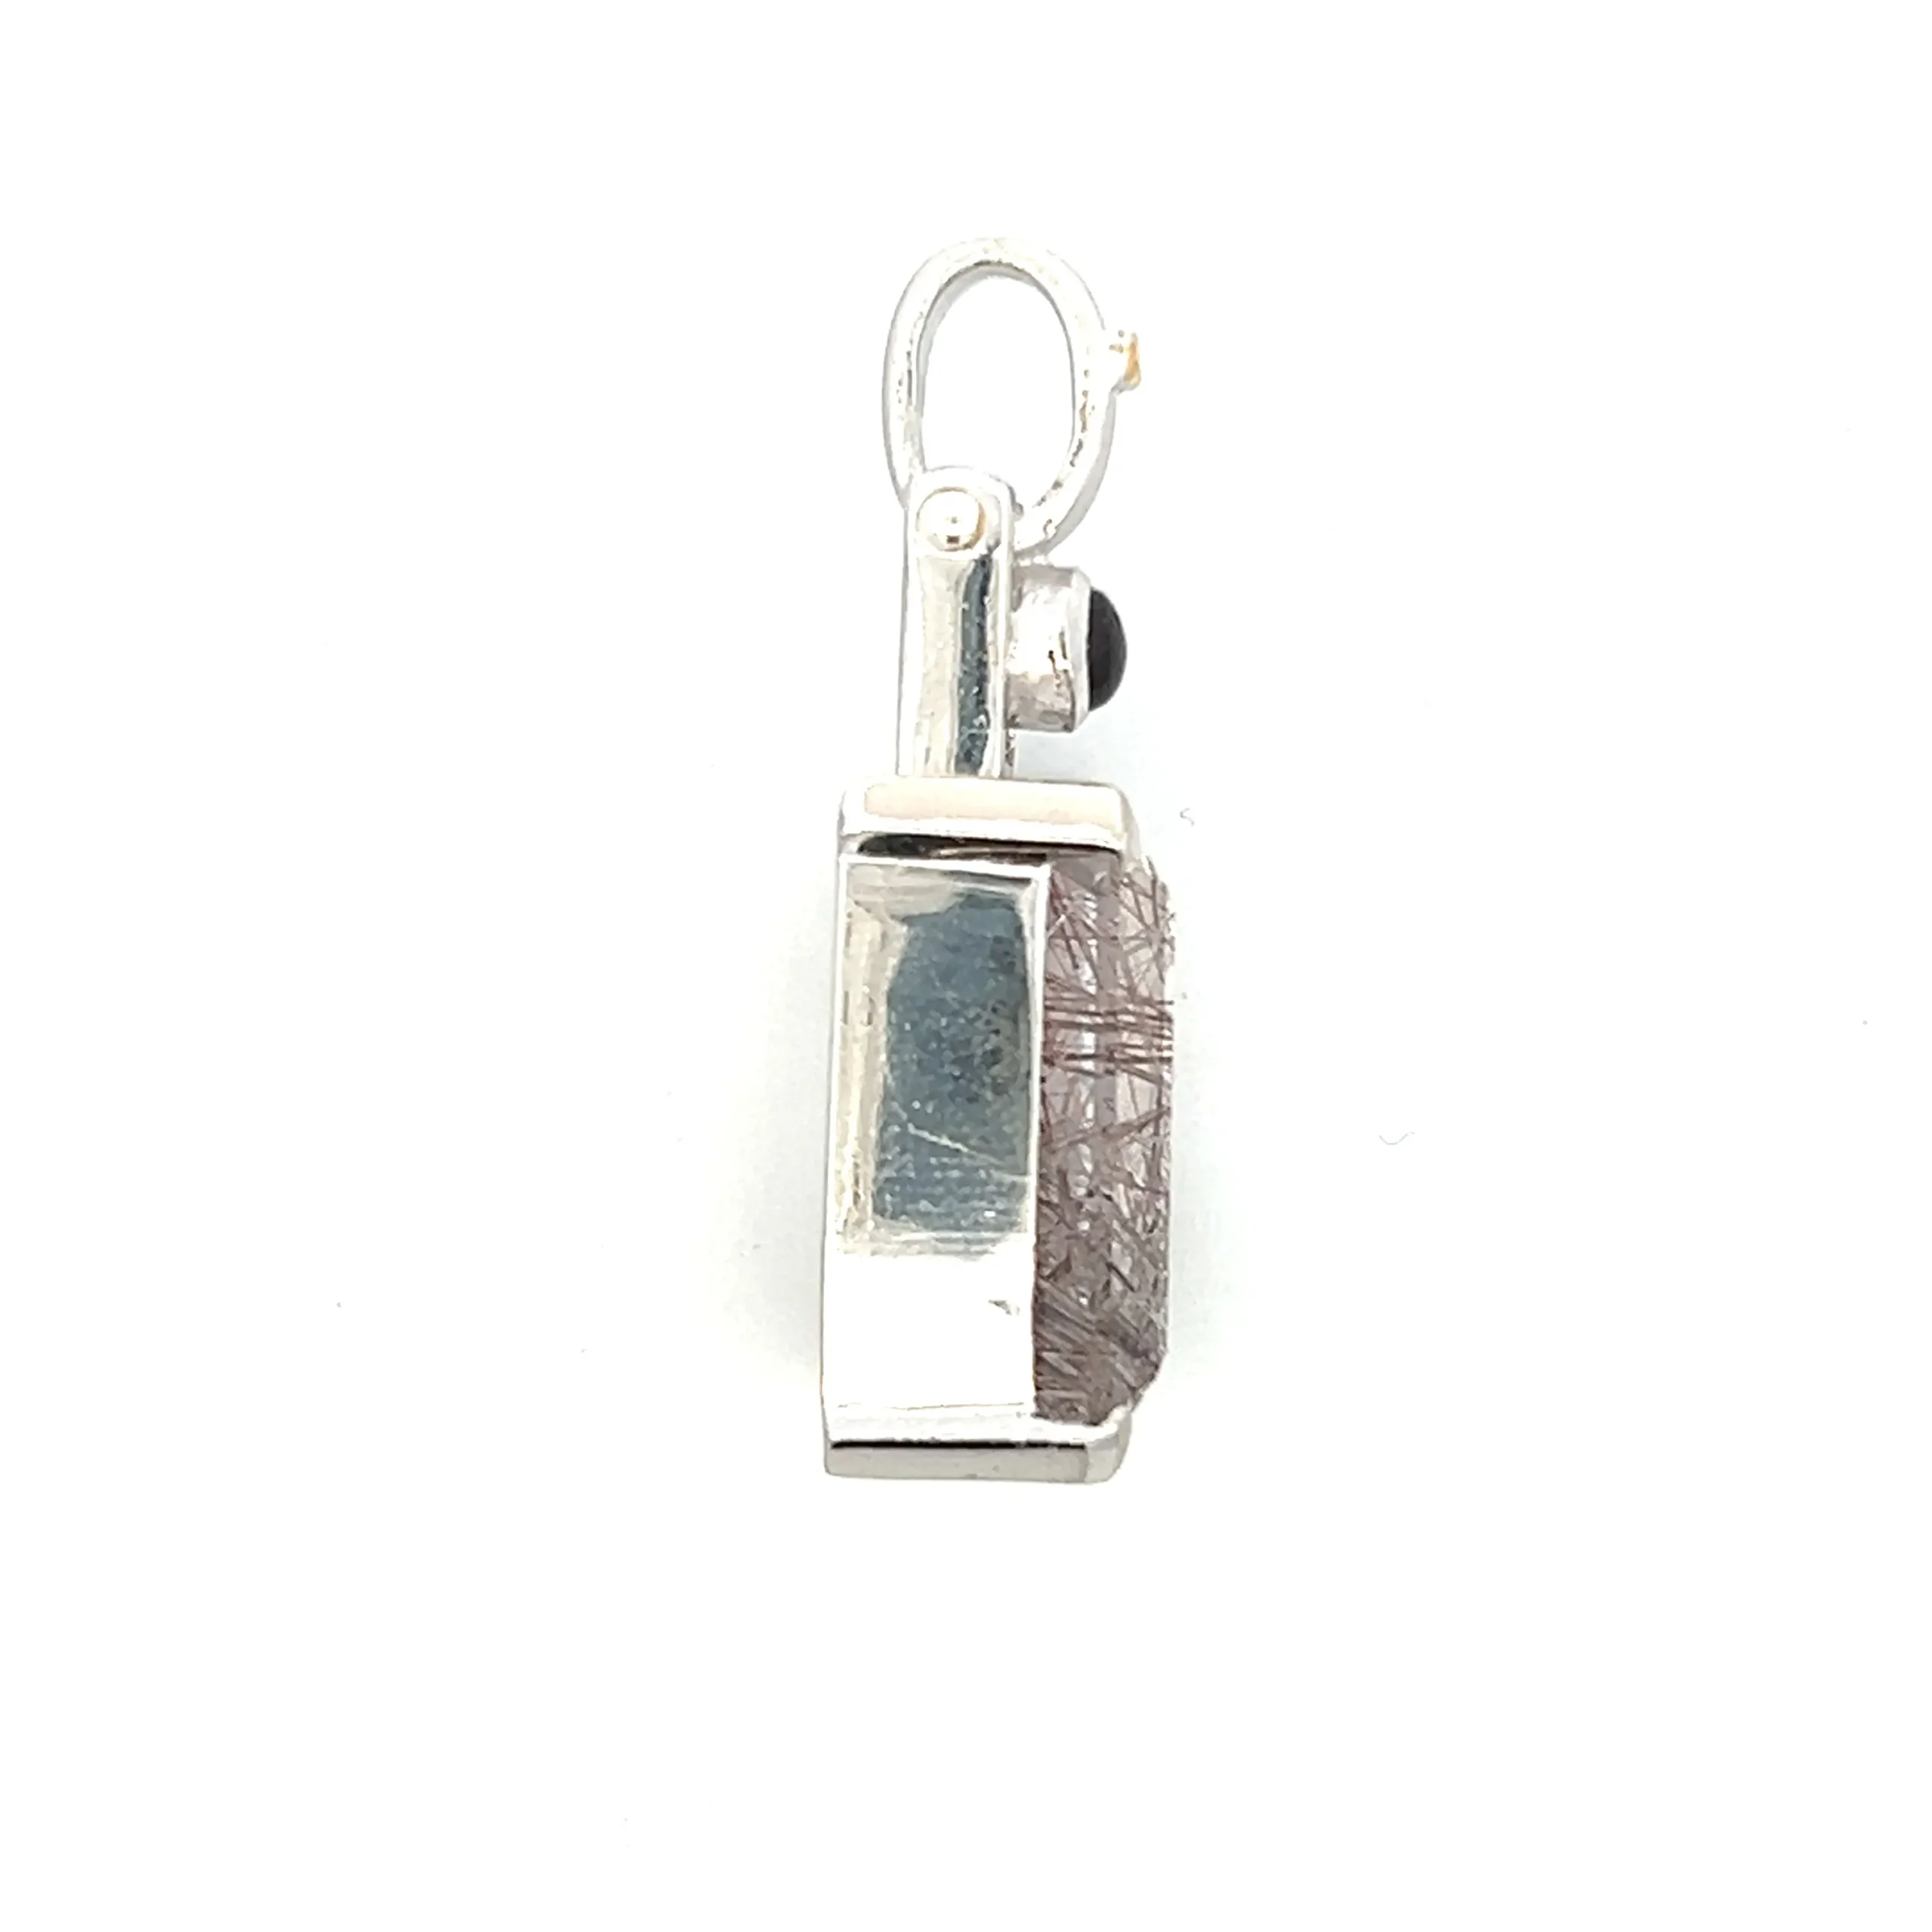 One estate sterling silver gemstone pendant containing a focal rectangle-shaped tourmalated quartz weighing 28.62 carats in a bezel setting and a small round tourmaline weighing 0.84 carat in a bezel setting above the quartz.